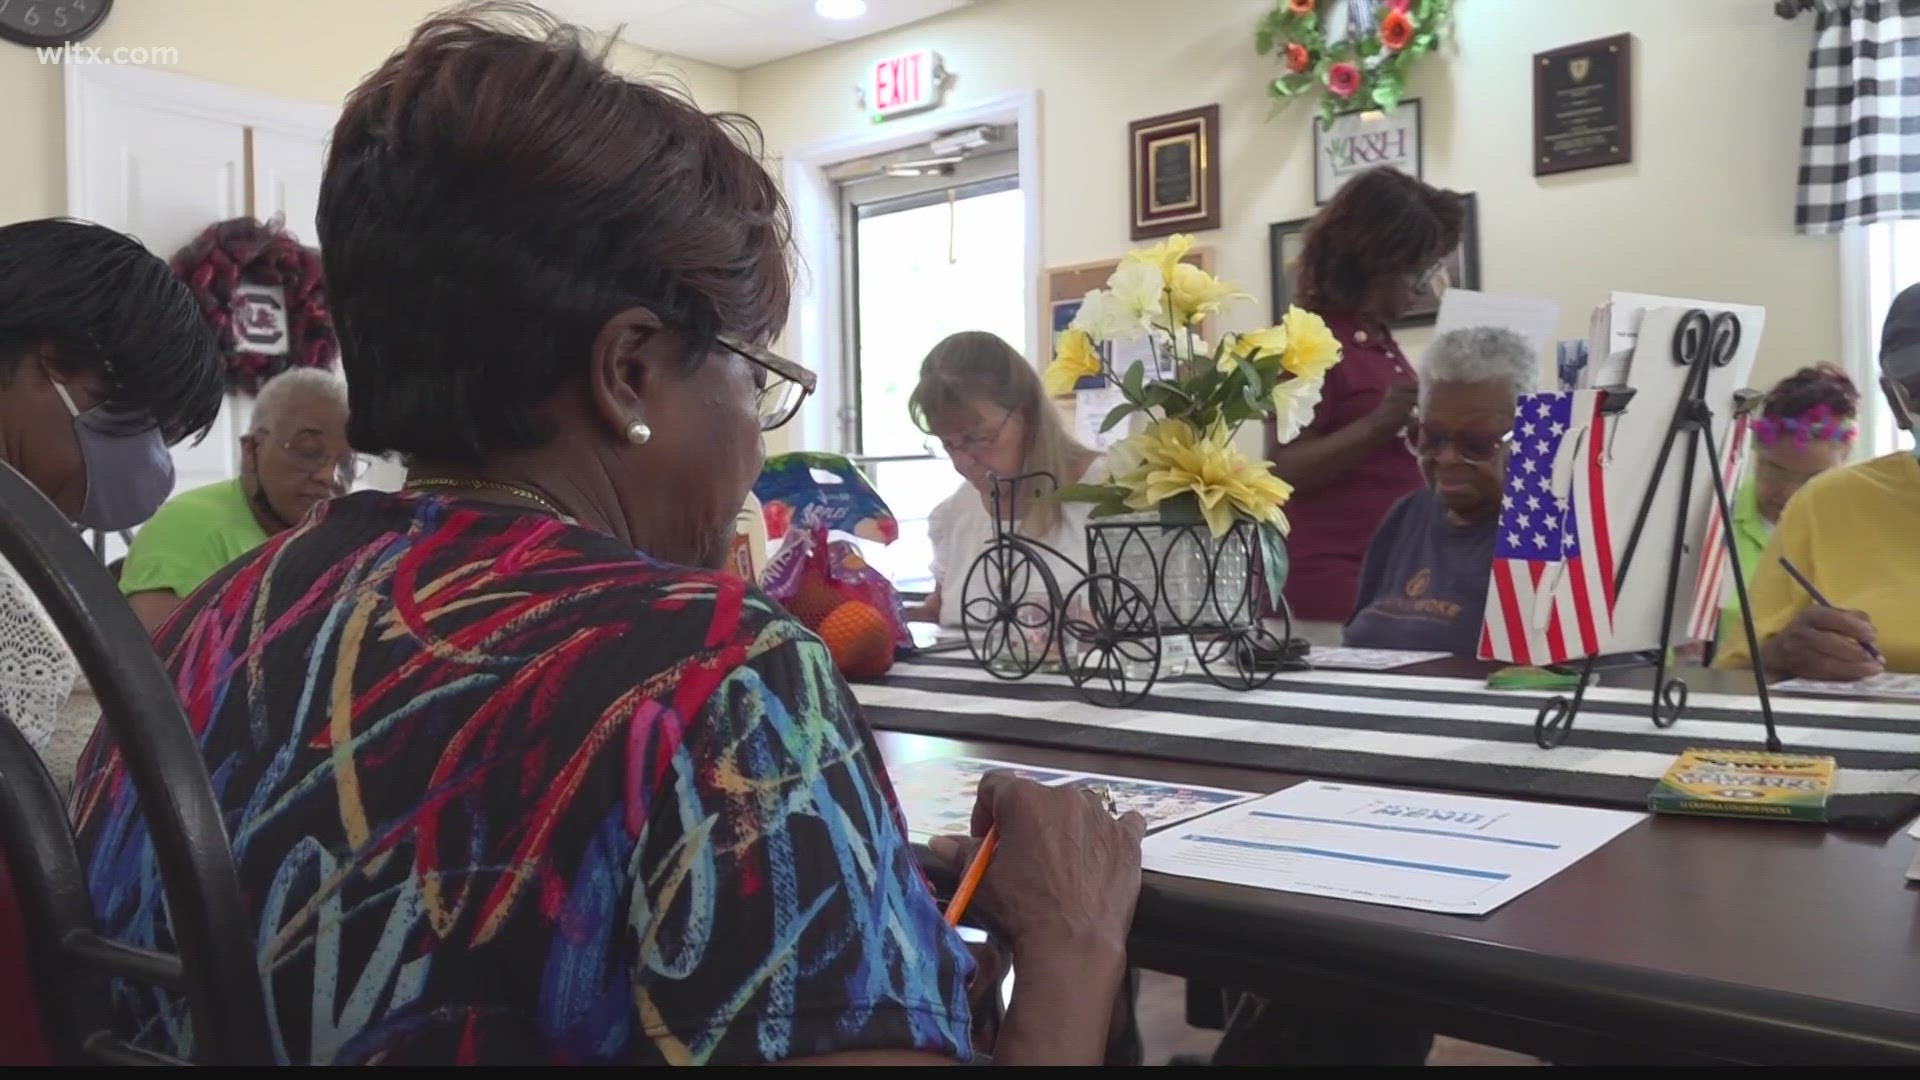 Kathleen Lawson Gibson opened K&H Resource Center to connect her community with local resources from resume writing tips to health and wellness sessions.